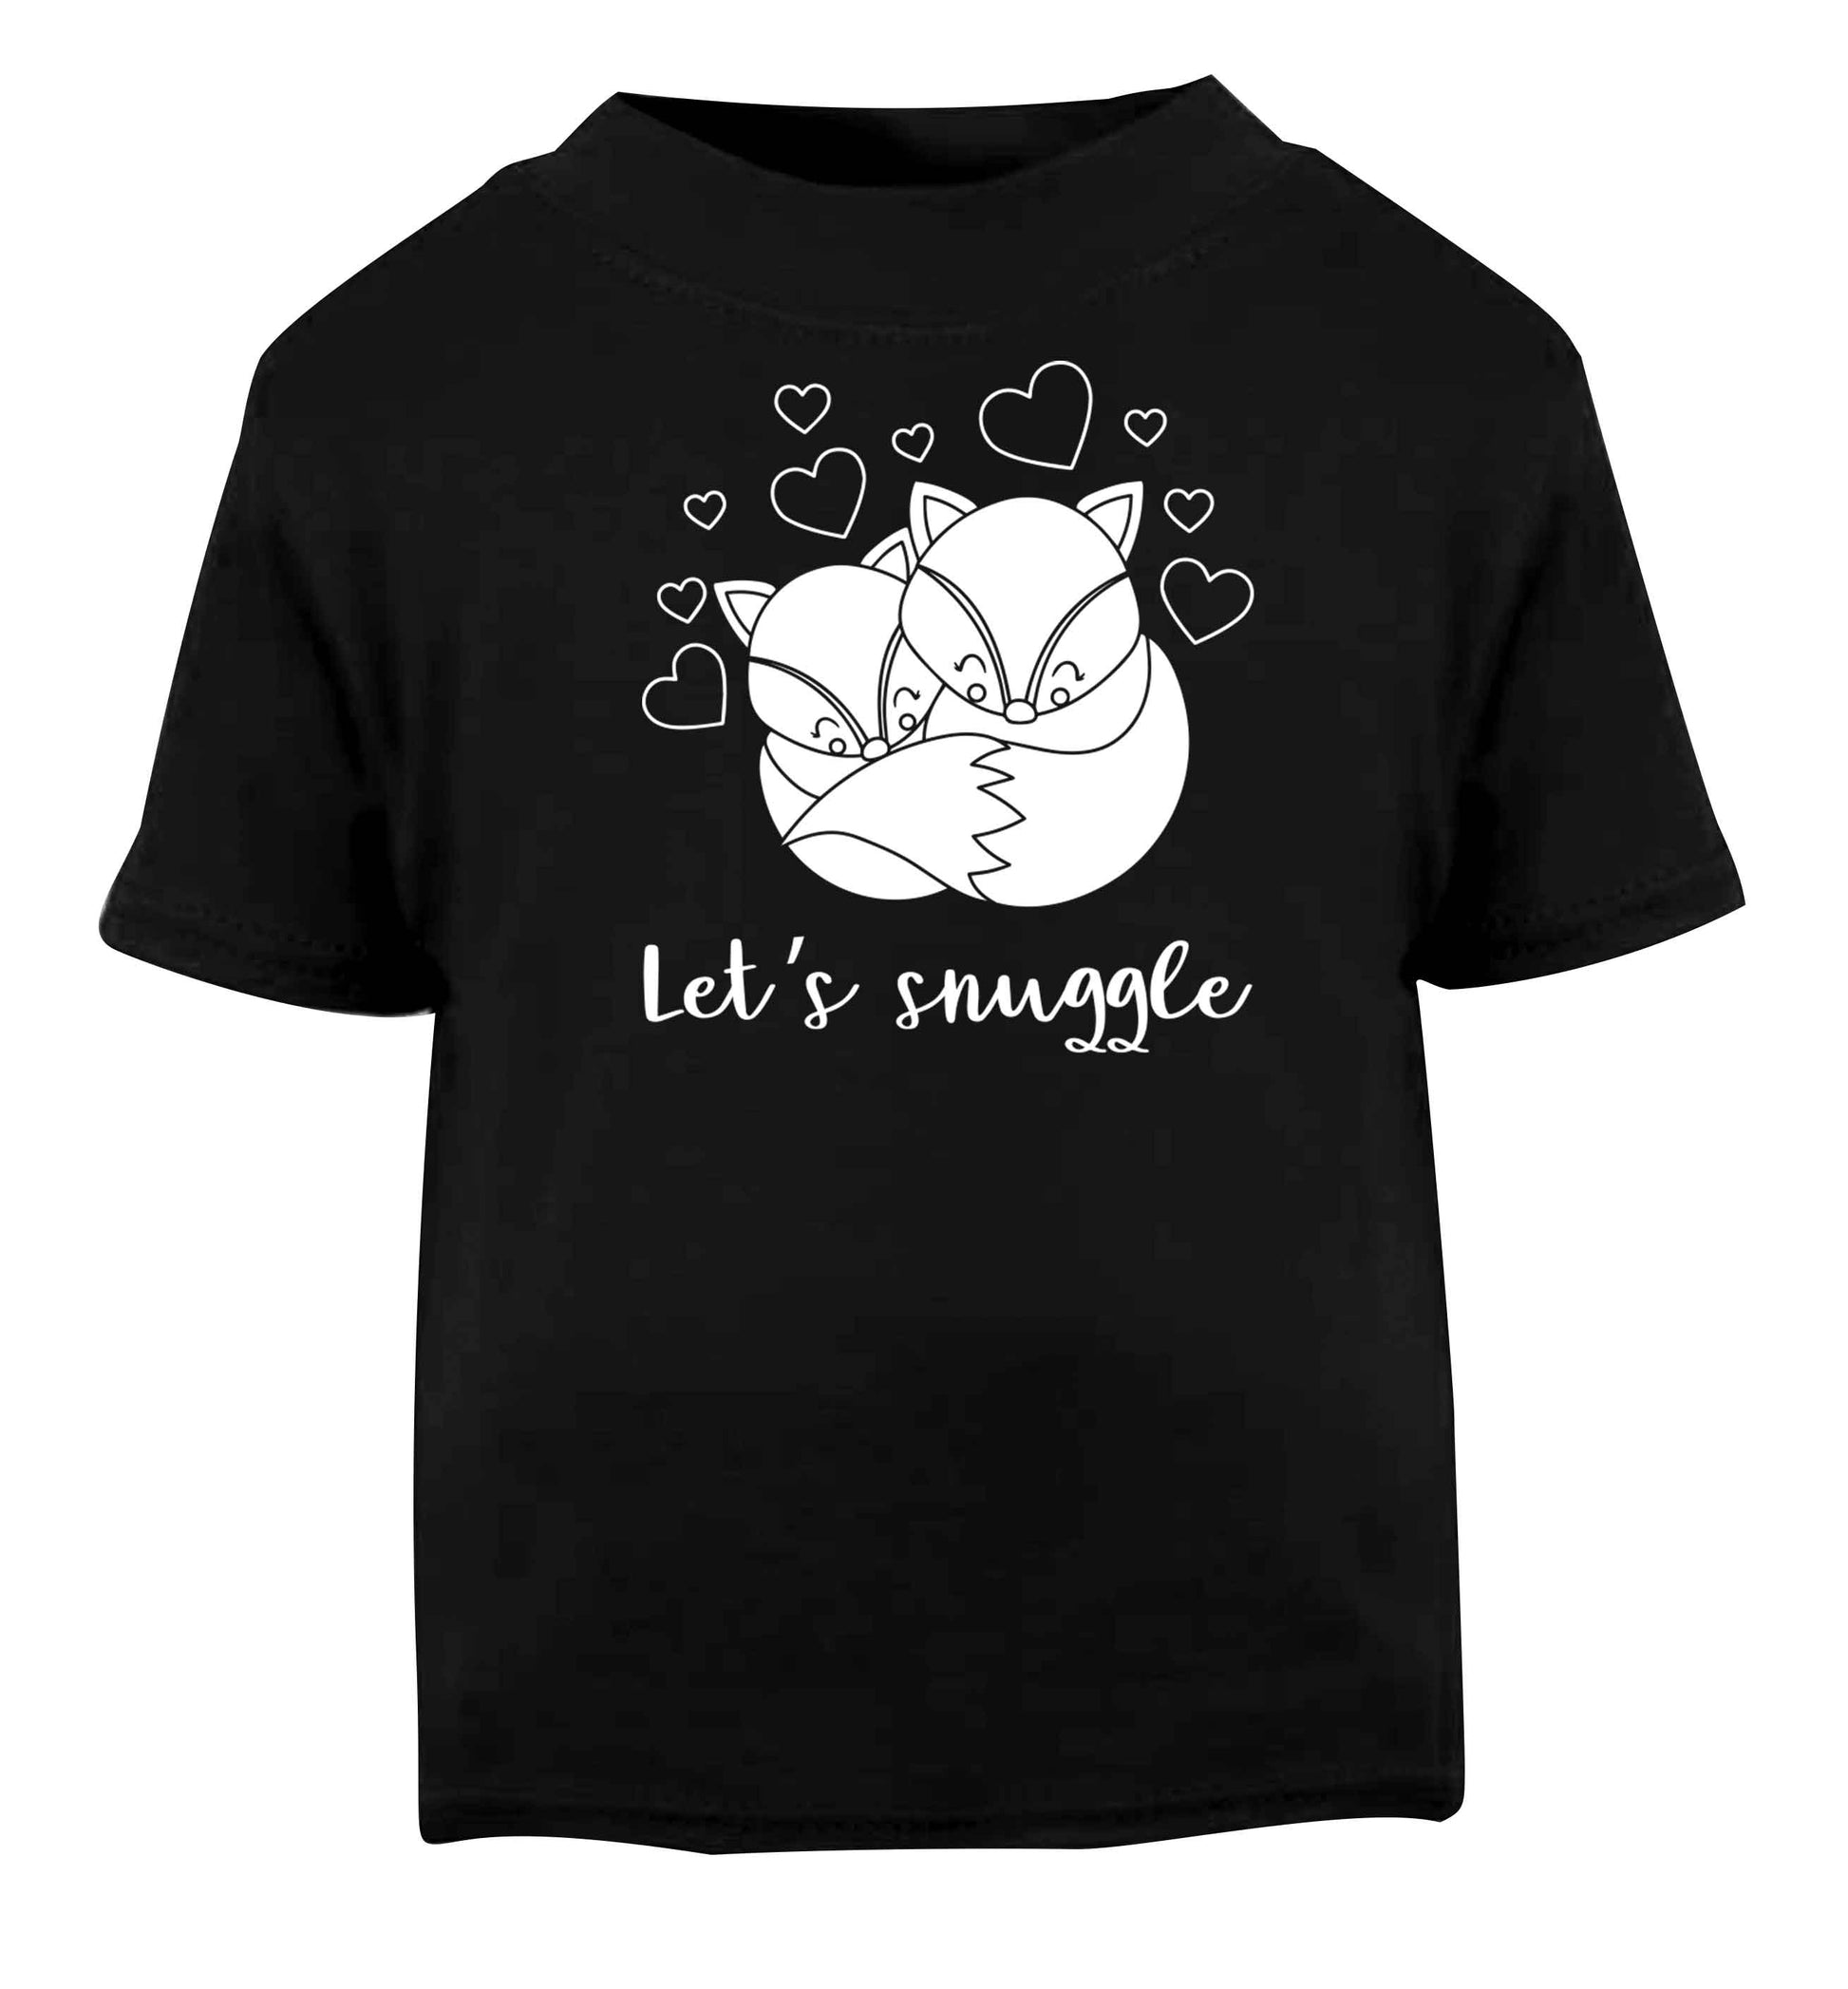 Let's snuggle Black baby toddler Tshirt 2 years